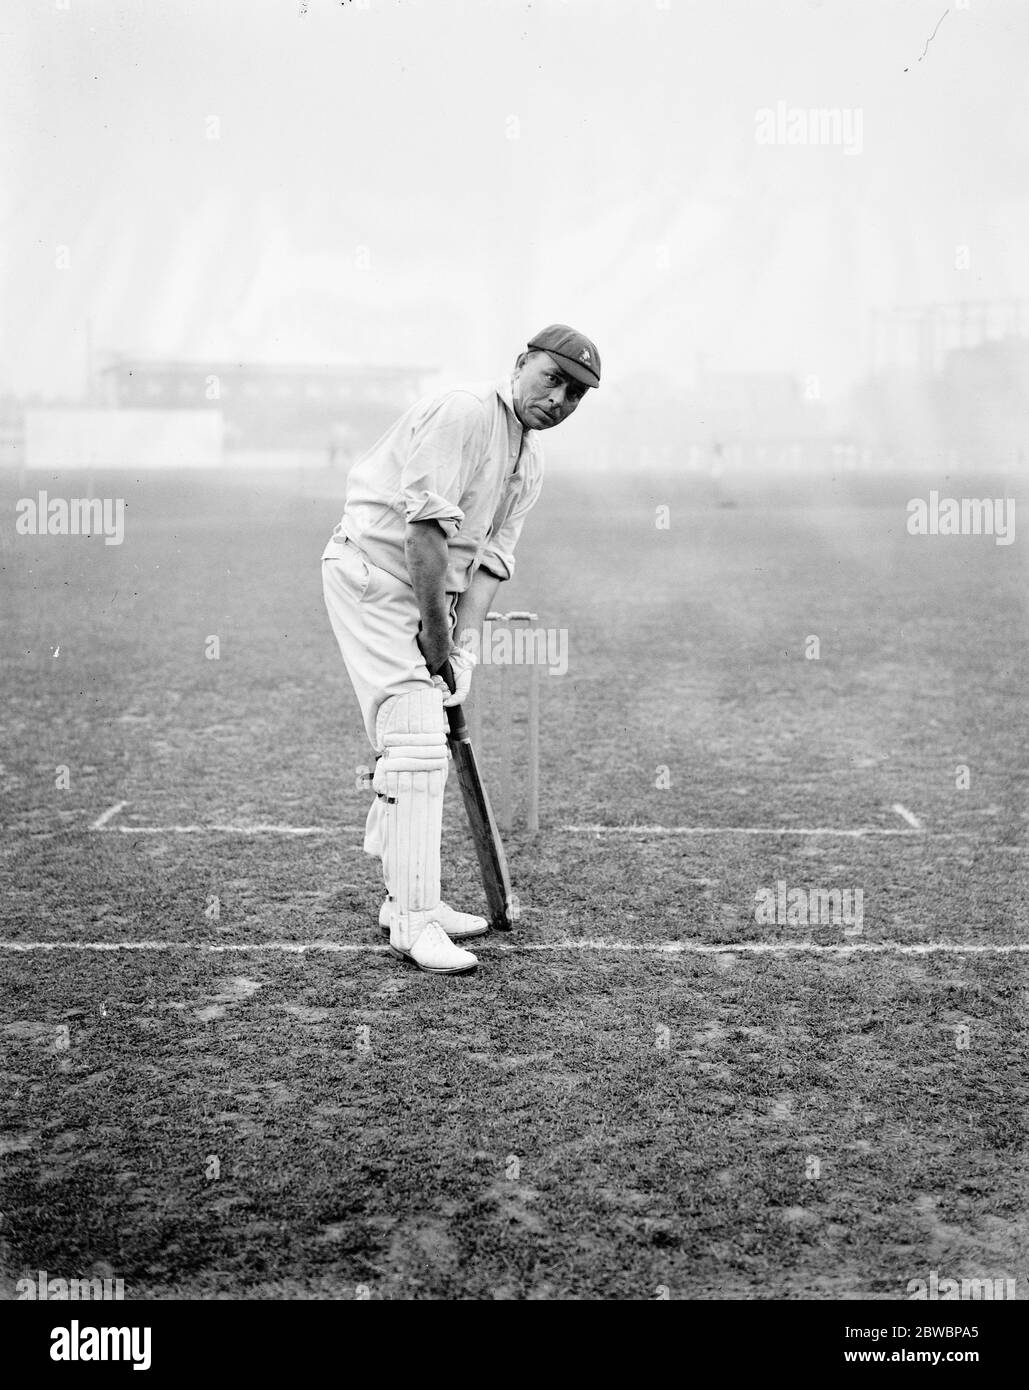 South African cricketers practice at the Kennington Oval , London Claude Carter ( Natal ) , who has been playing first class cricket for 25 years . He is considered to be an outstanding left hand bowler 26 April 1924 Stock Photo